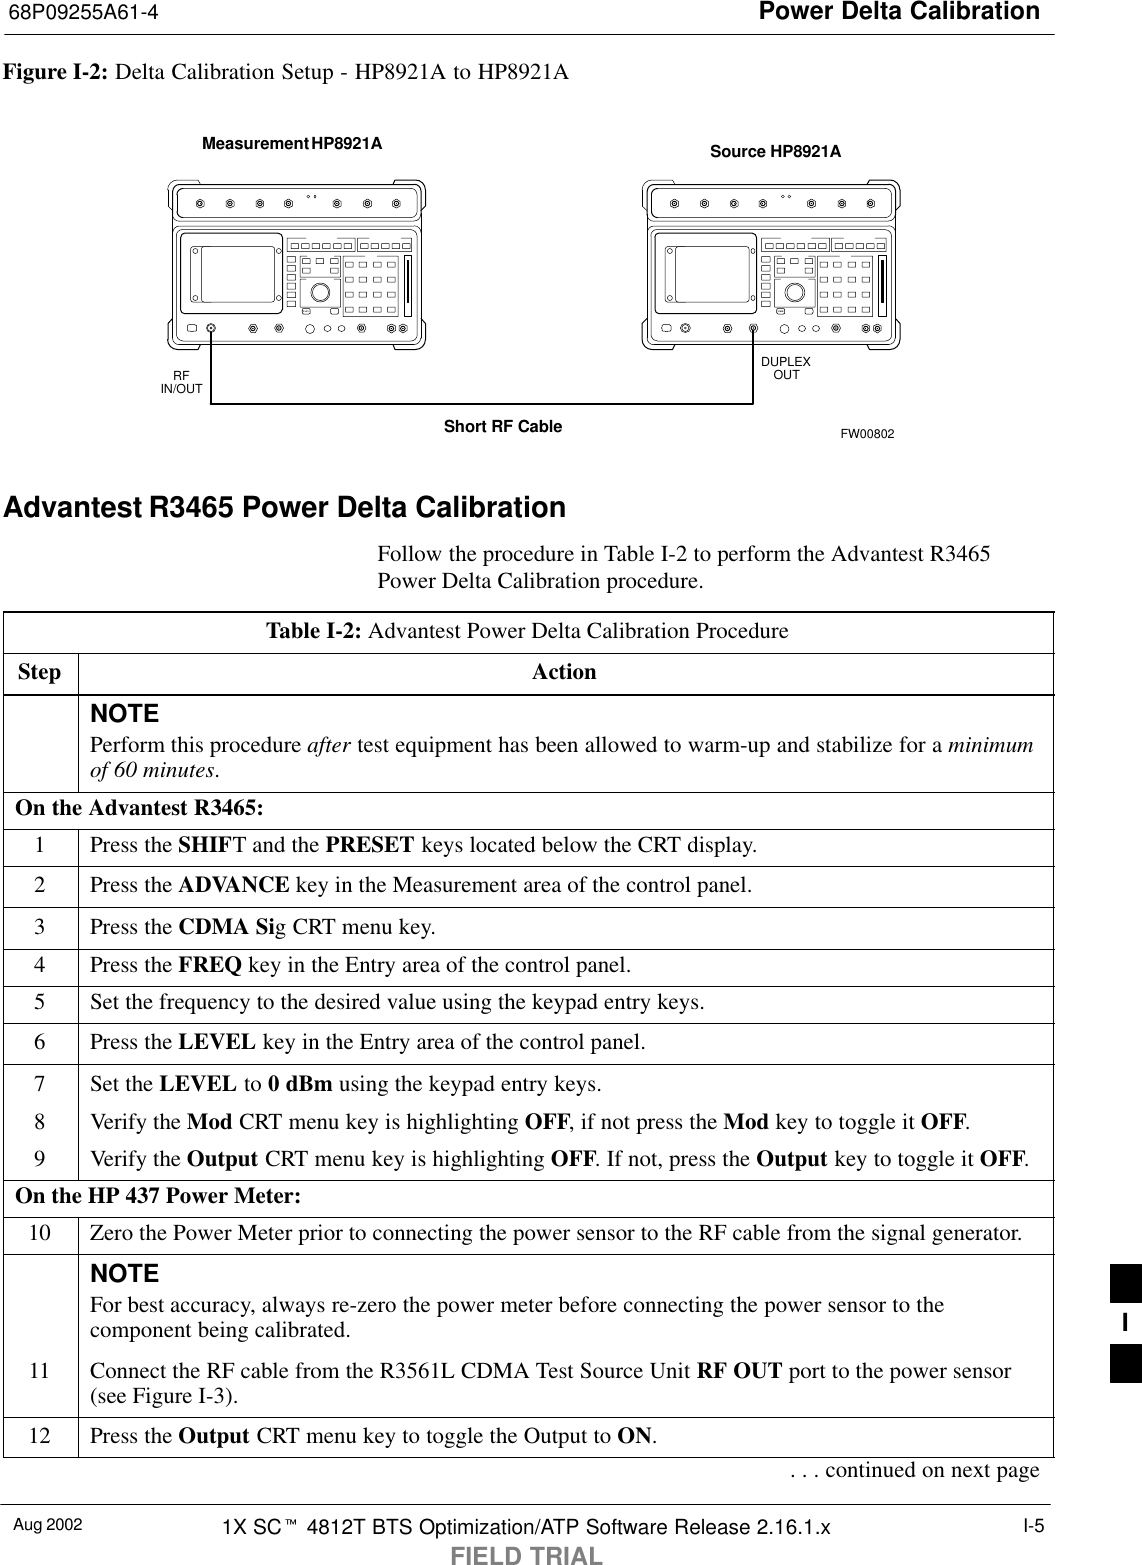 Power Delta Calibration68P09255A61-4Aug 2002 1X SCt 4812T BTS Optimization/ATP Software Release 2.16.1.xFIELD TRIALI-5Figure I-2: Delta Calibration Setup - HP8921A to HP8921AMeasurement HP8921A Source HP8921AShort RF CableDUPLEXOUTRFIN/OUTFW00802Advantest R3465 Power Delta CalibrationFollow the procedure in Table I-2 to perform the Advantest R3465Power Delta Calibration procedure.Table I-2: Advantest Power Delta Calibration ProcedureStep ActionNOTEPerform this procedure after test equipment has been allowed to warm-up and stabilize for a minimumof 60 minutes.On the Advantest R3465:1Press the SHIFT and the PRESET keys located below the CRT display.2Press the ADVANCE key in the Measurement area of the control panel.3Press the CDMA Sig CRT menu key.4Press the FREQ key in the Entry area of the control panel.5Set the frequency to the desired value using the keypad entry keys.6Press the LEVEL key in the Entry area of the control panel.7Set the LEVEL to 0 dBm using the keypad entry keys.8Verify the Mod CRT menu key is highlighting OFF, if not press the Mod key to toggle it OFF.9Verify the Output CRT menu key is highlighting OFF. If not, press the Output key to toggle it OFF.On the HP 437 Power Meter:10 Zero the Power Meter prior to connecting the power sensor to the RF cable from the signal generator.NOTEFor best accuracy, always re-zero the power meter before connecting the power sensor to thecomponent being calibrated.11 Connect the RF cable from the R3561L CDMA Test Source Unit RF OUT port to the power sensor(see Figure I-3).12 Press the Output CRT menu key to toggle the Output to ON.. . . continued on next pageI